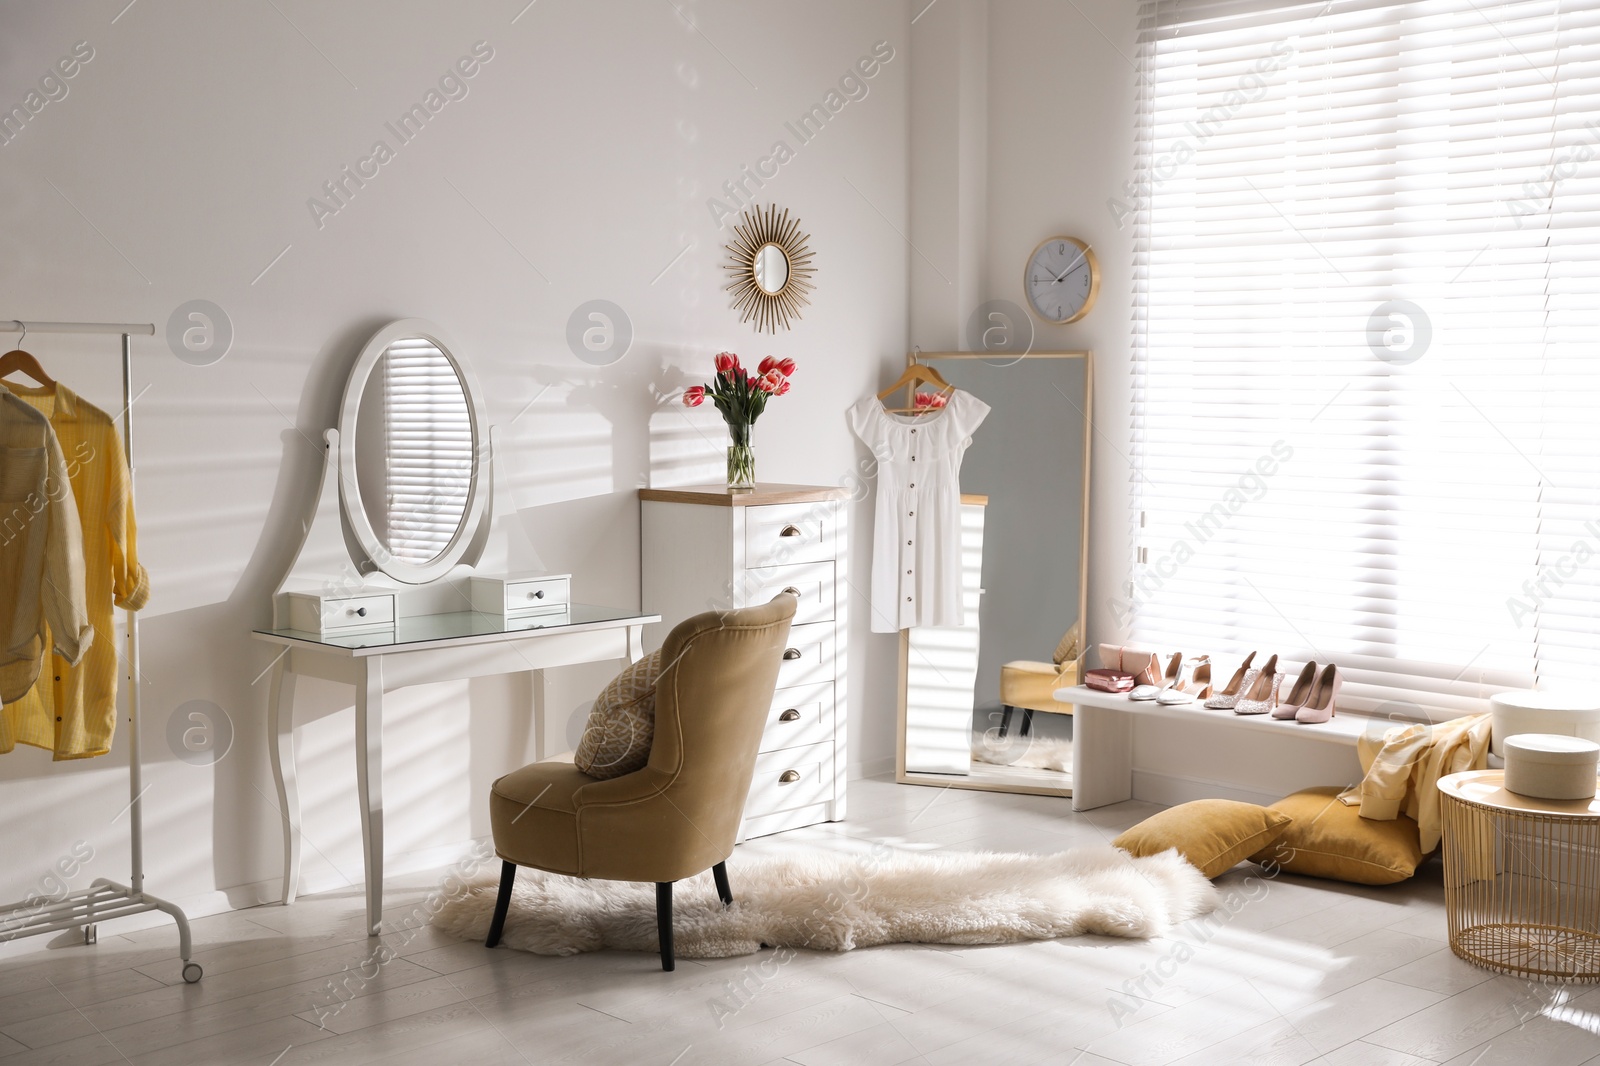 Photo of Stylish room interior with elegant dressing table, mirror and comfortable chair